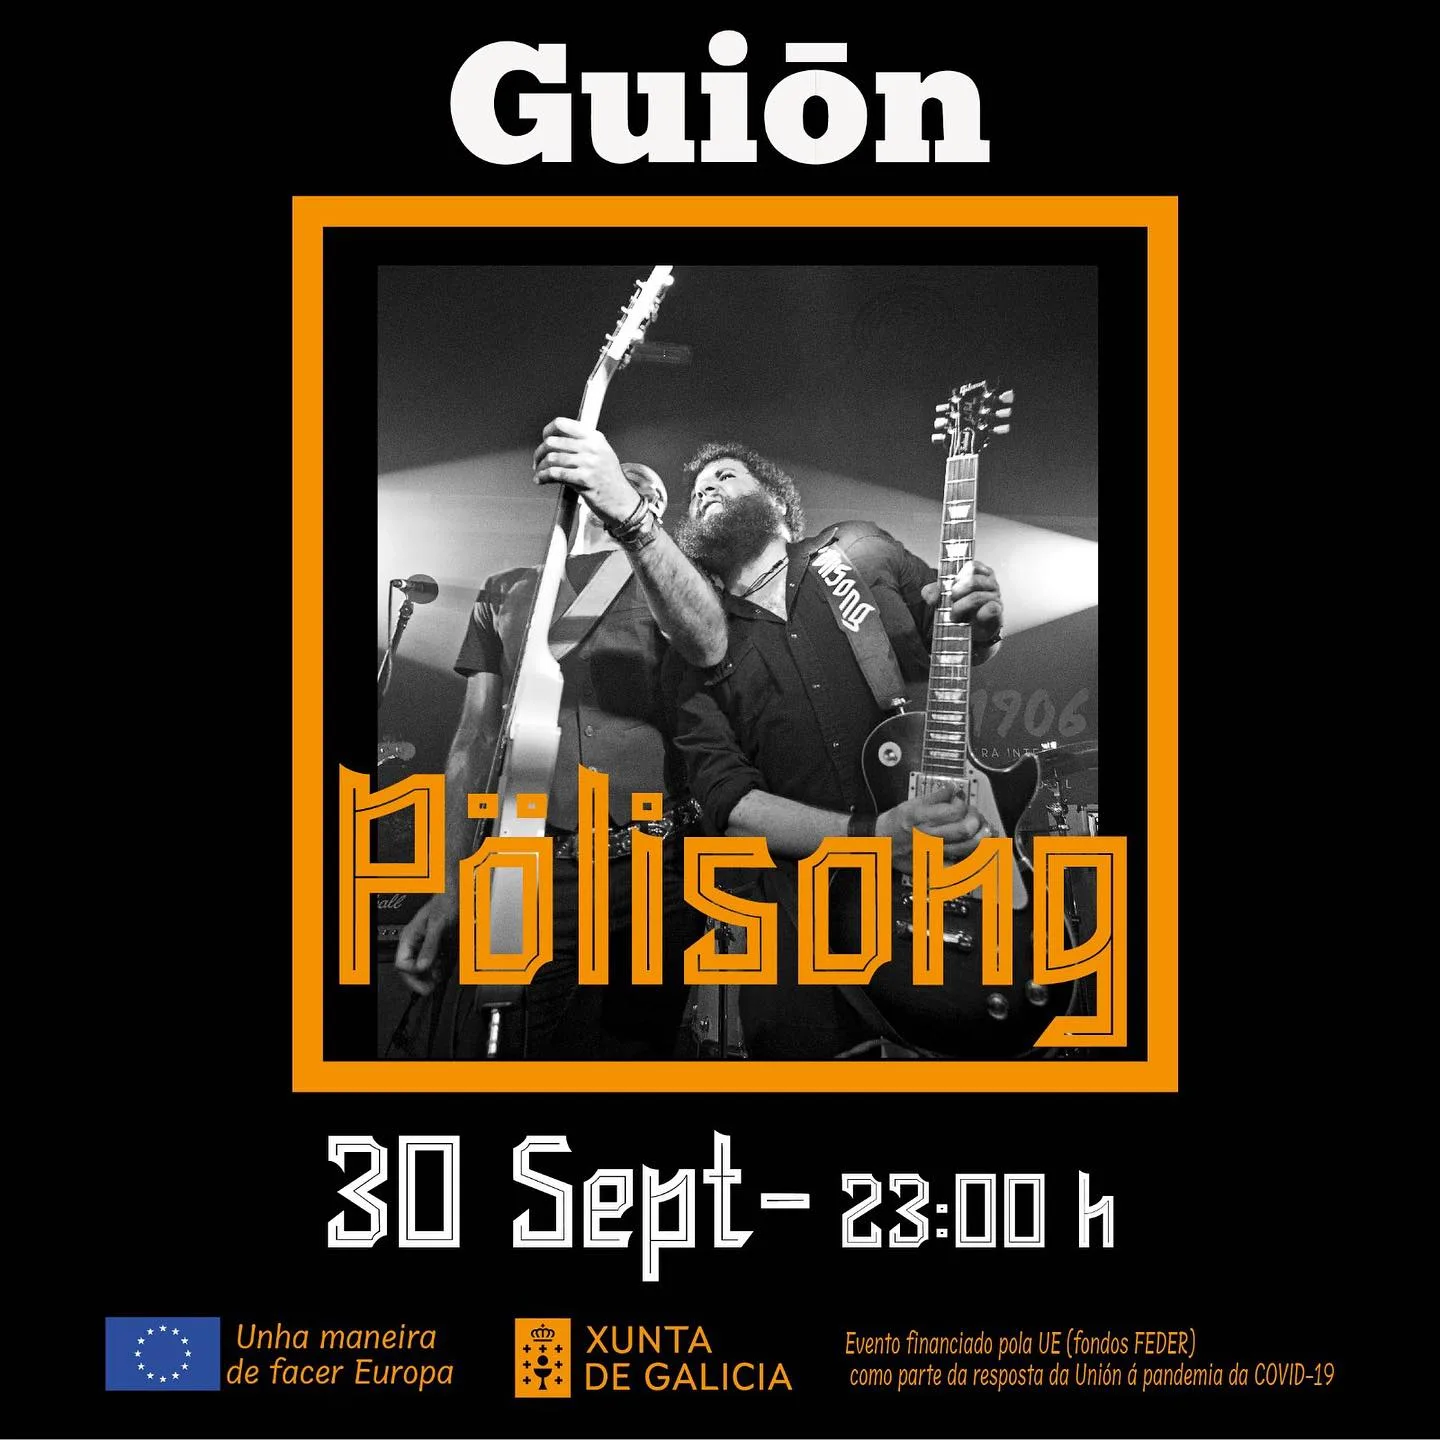 Polisong Guion Clube Pontedeume jpg